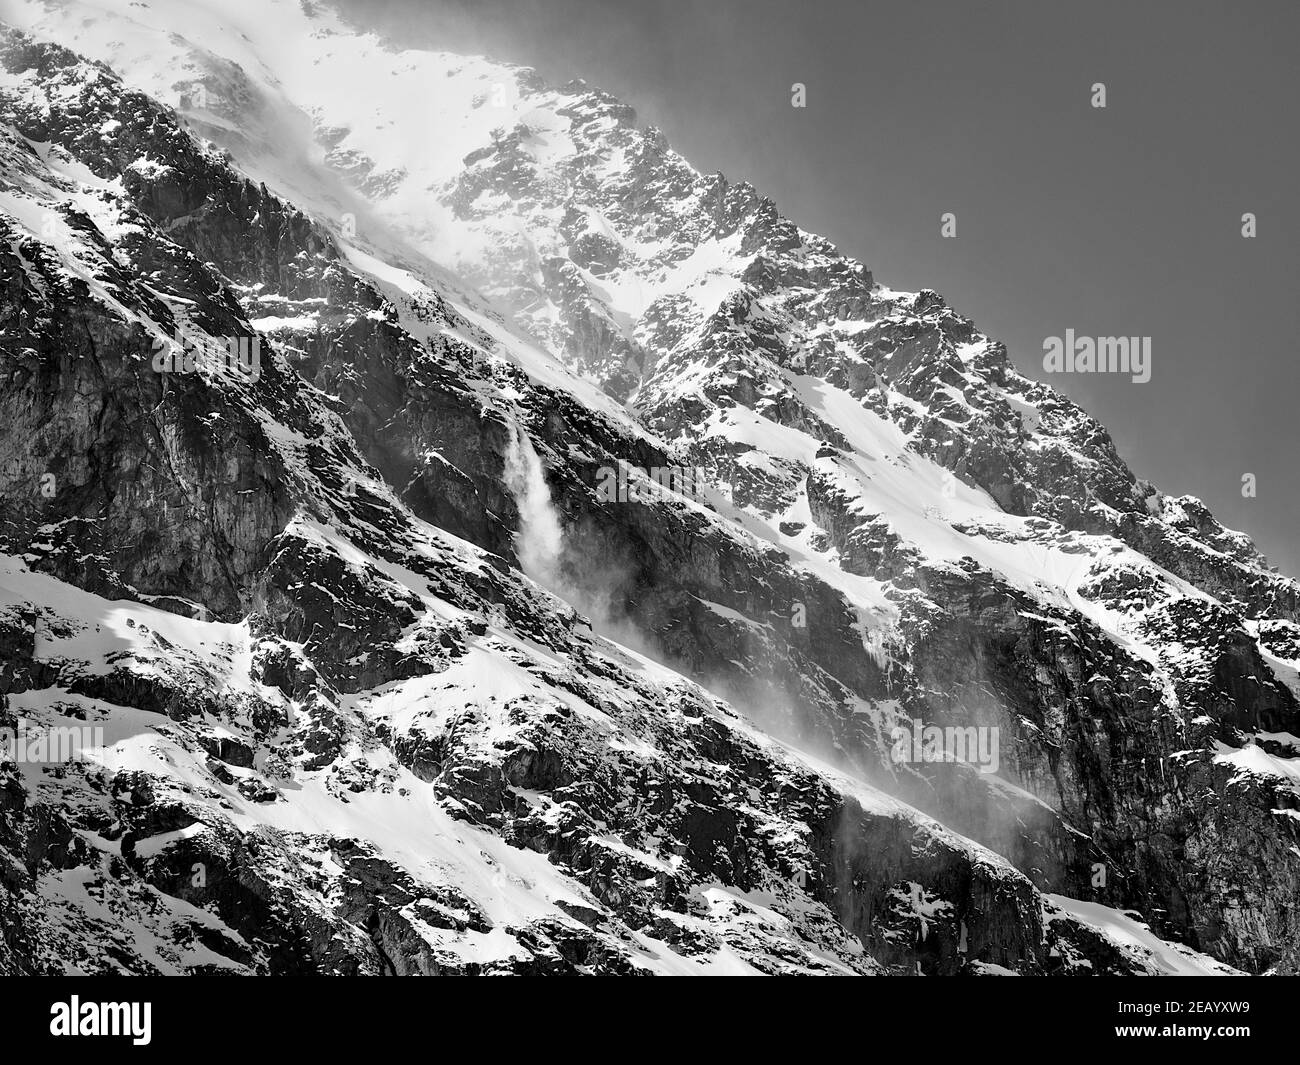 Valsavarenche, Aosta Valle (Italy): avalanche crumbling from the top of Punta Bioula. Stock Photo